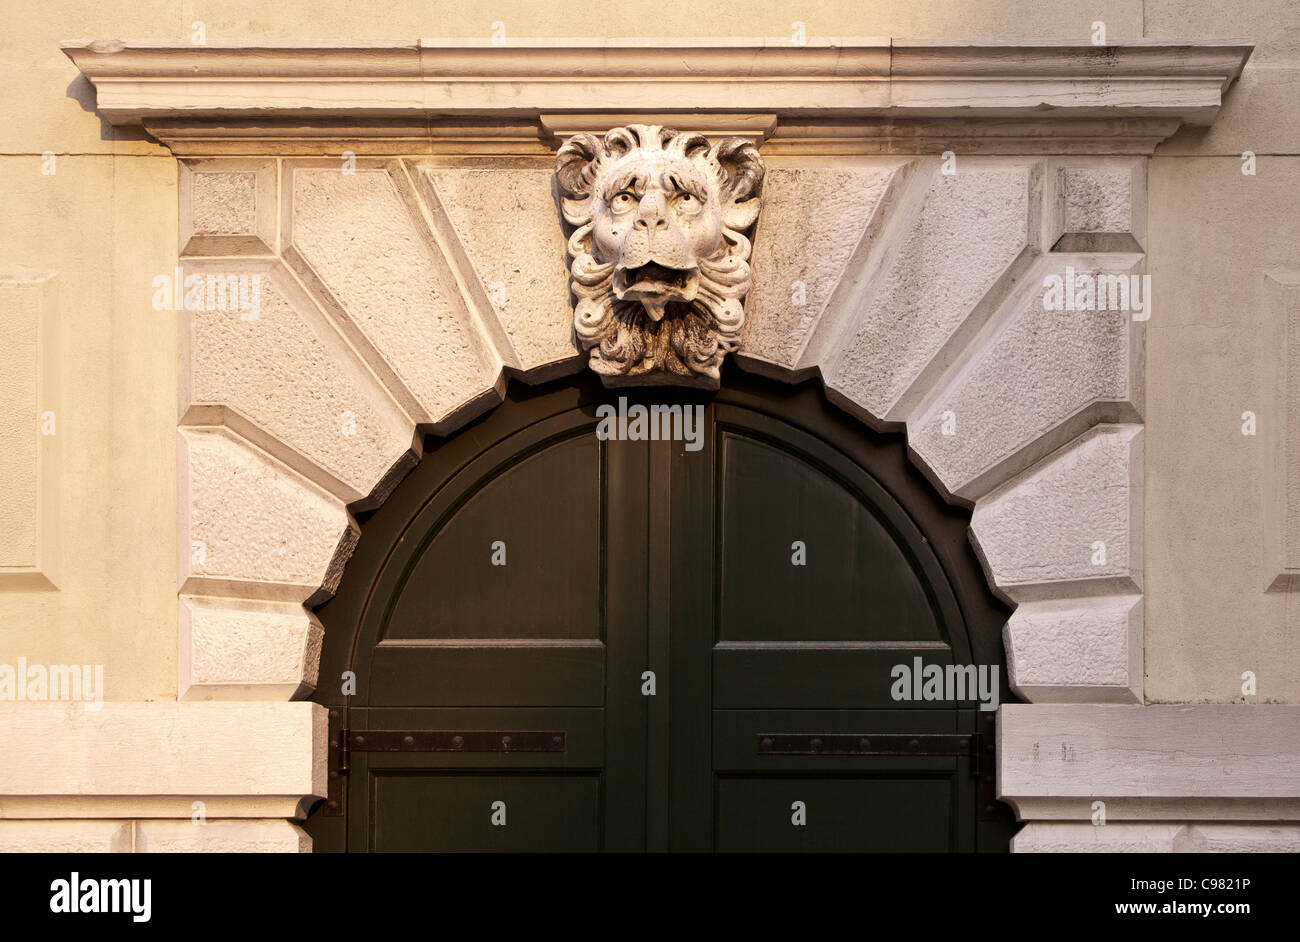 Stone arched doorway, with keystone in the form of a lion's head Stock Photo